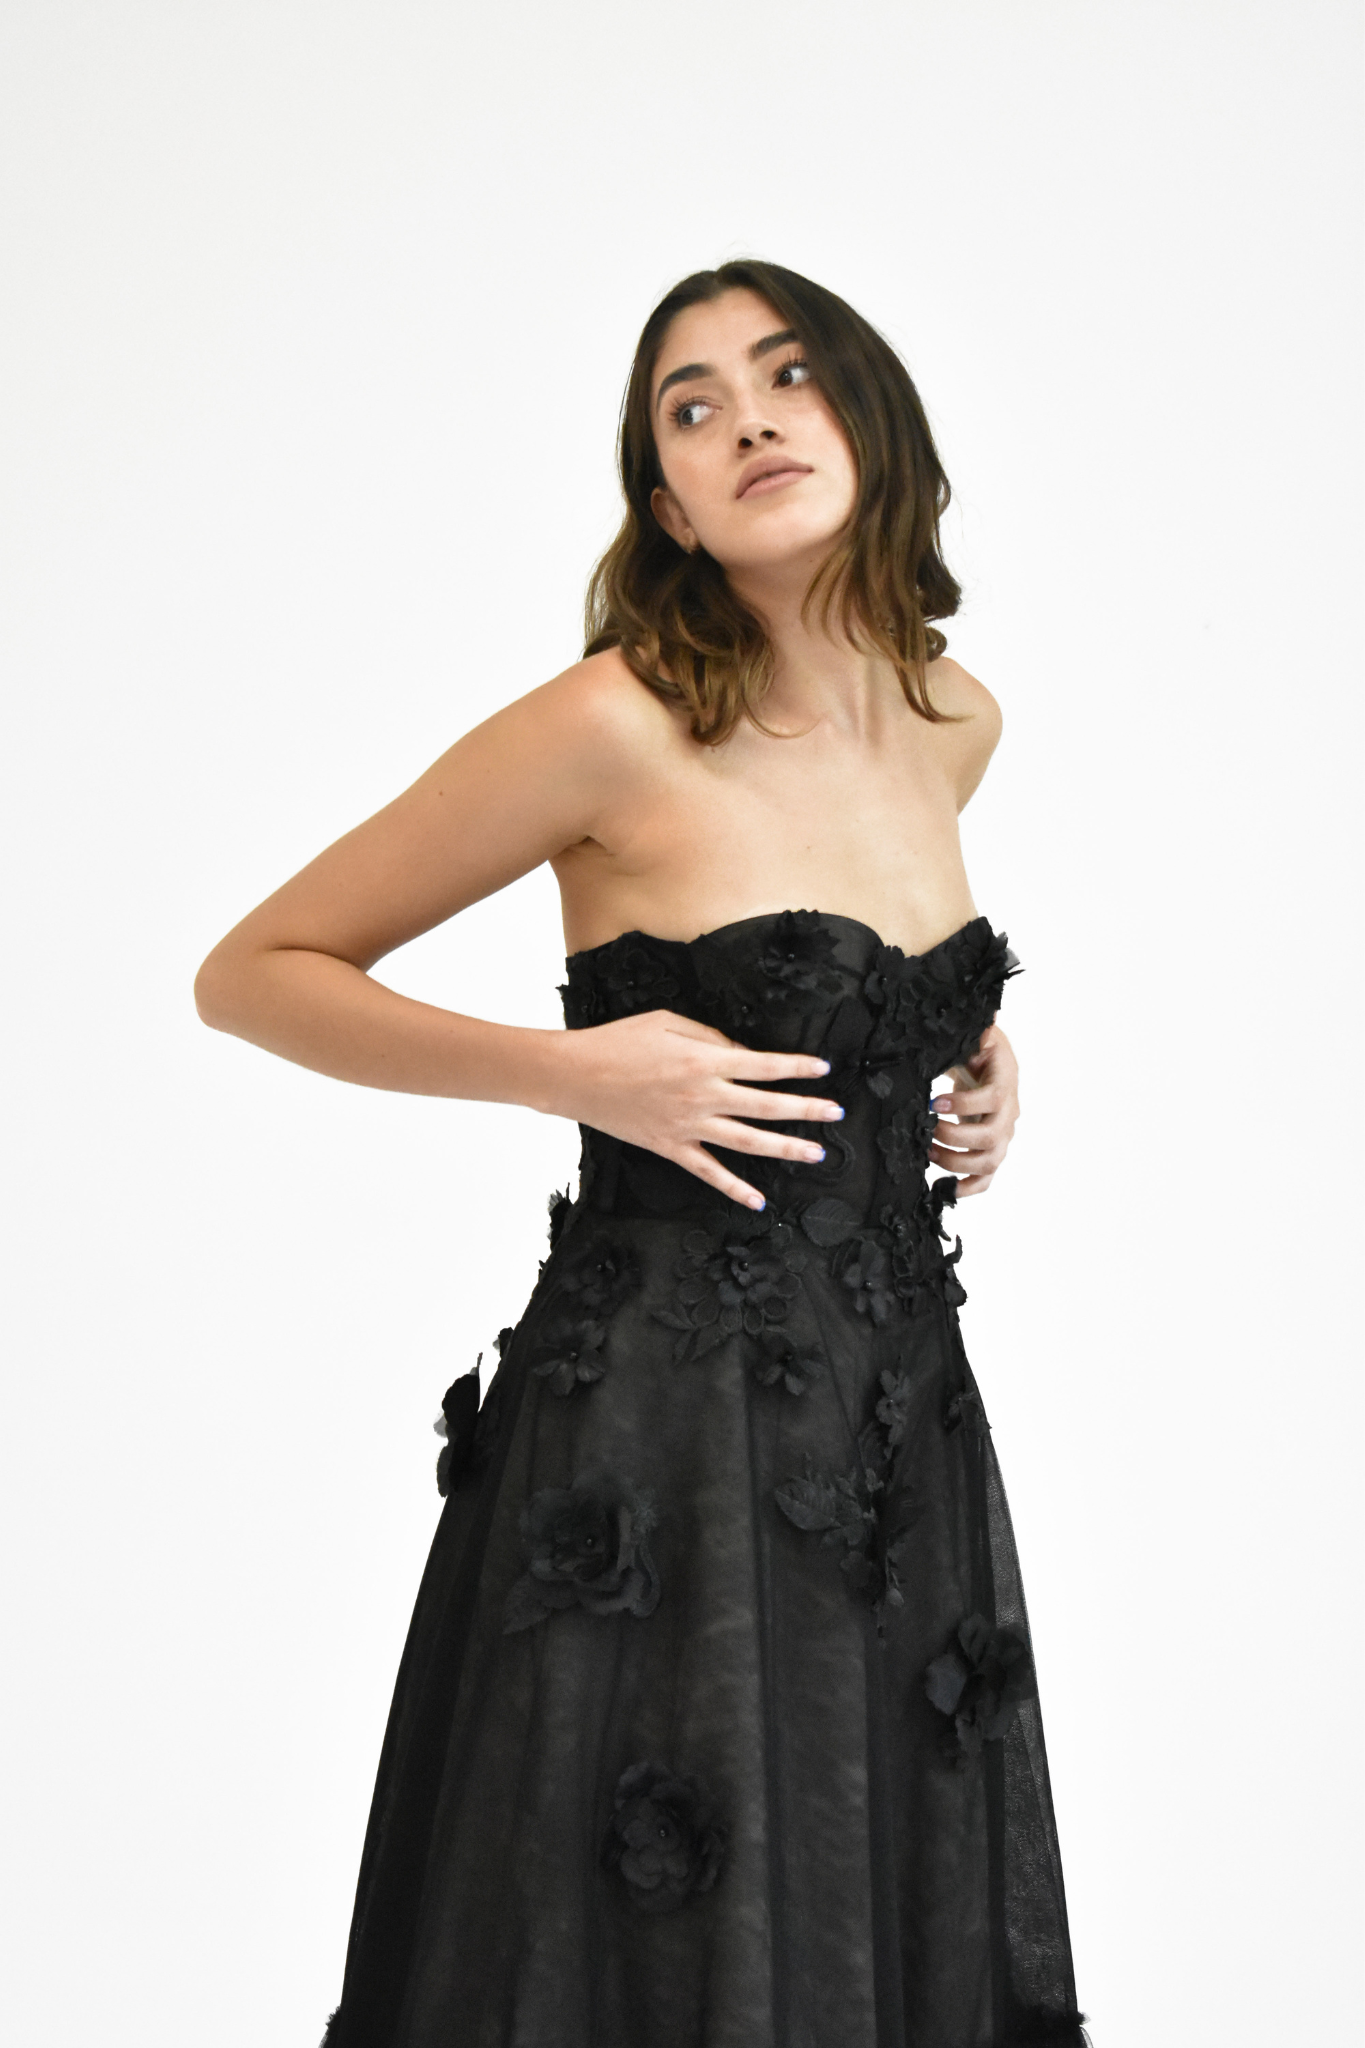 BLACK CORSET MIDI TULLE DRESS WITH FLORAL EMBROIDERY DETAILS